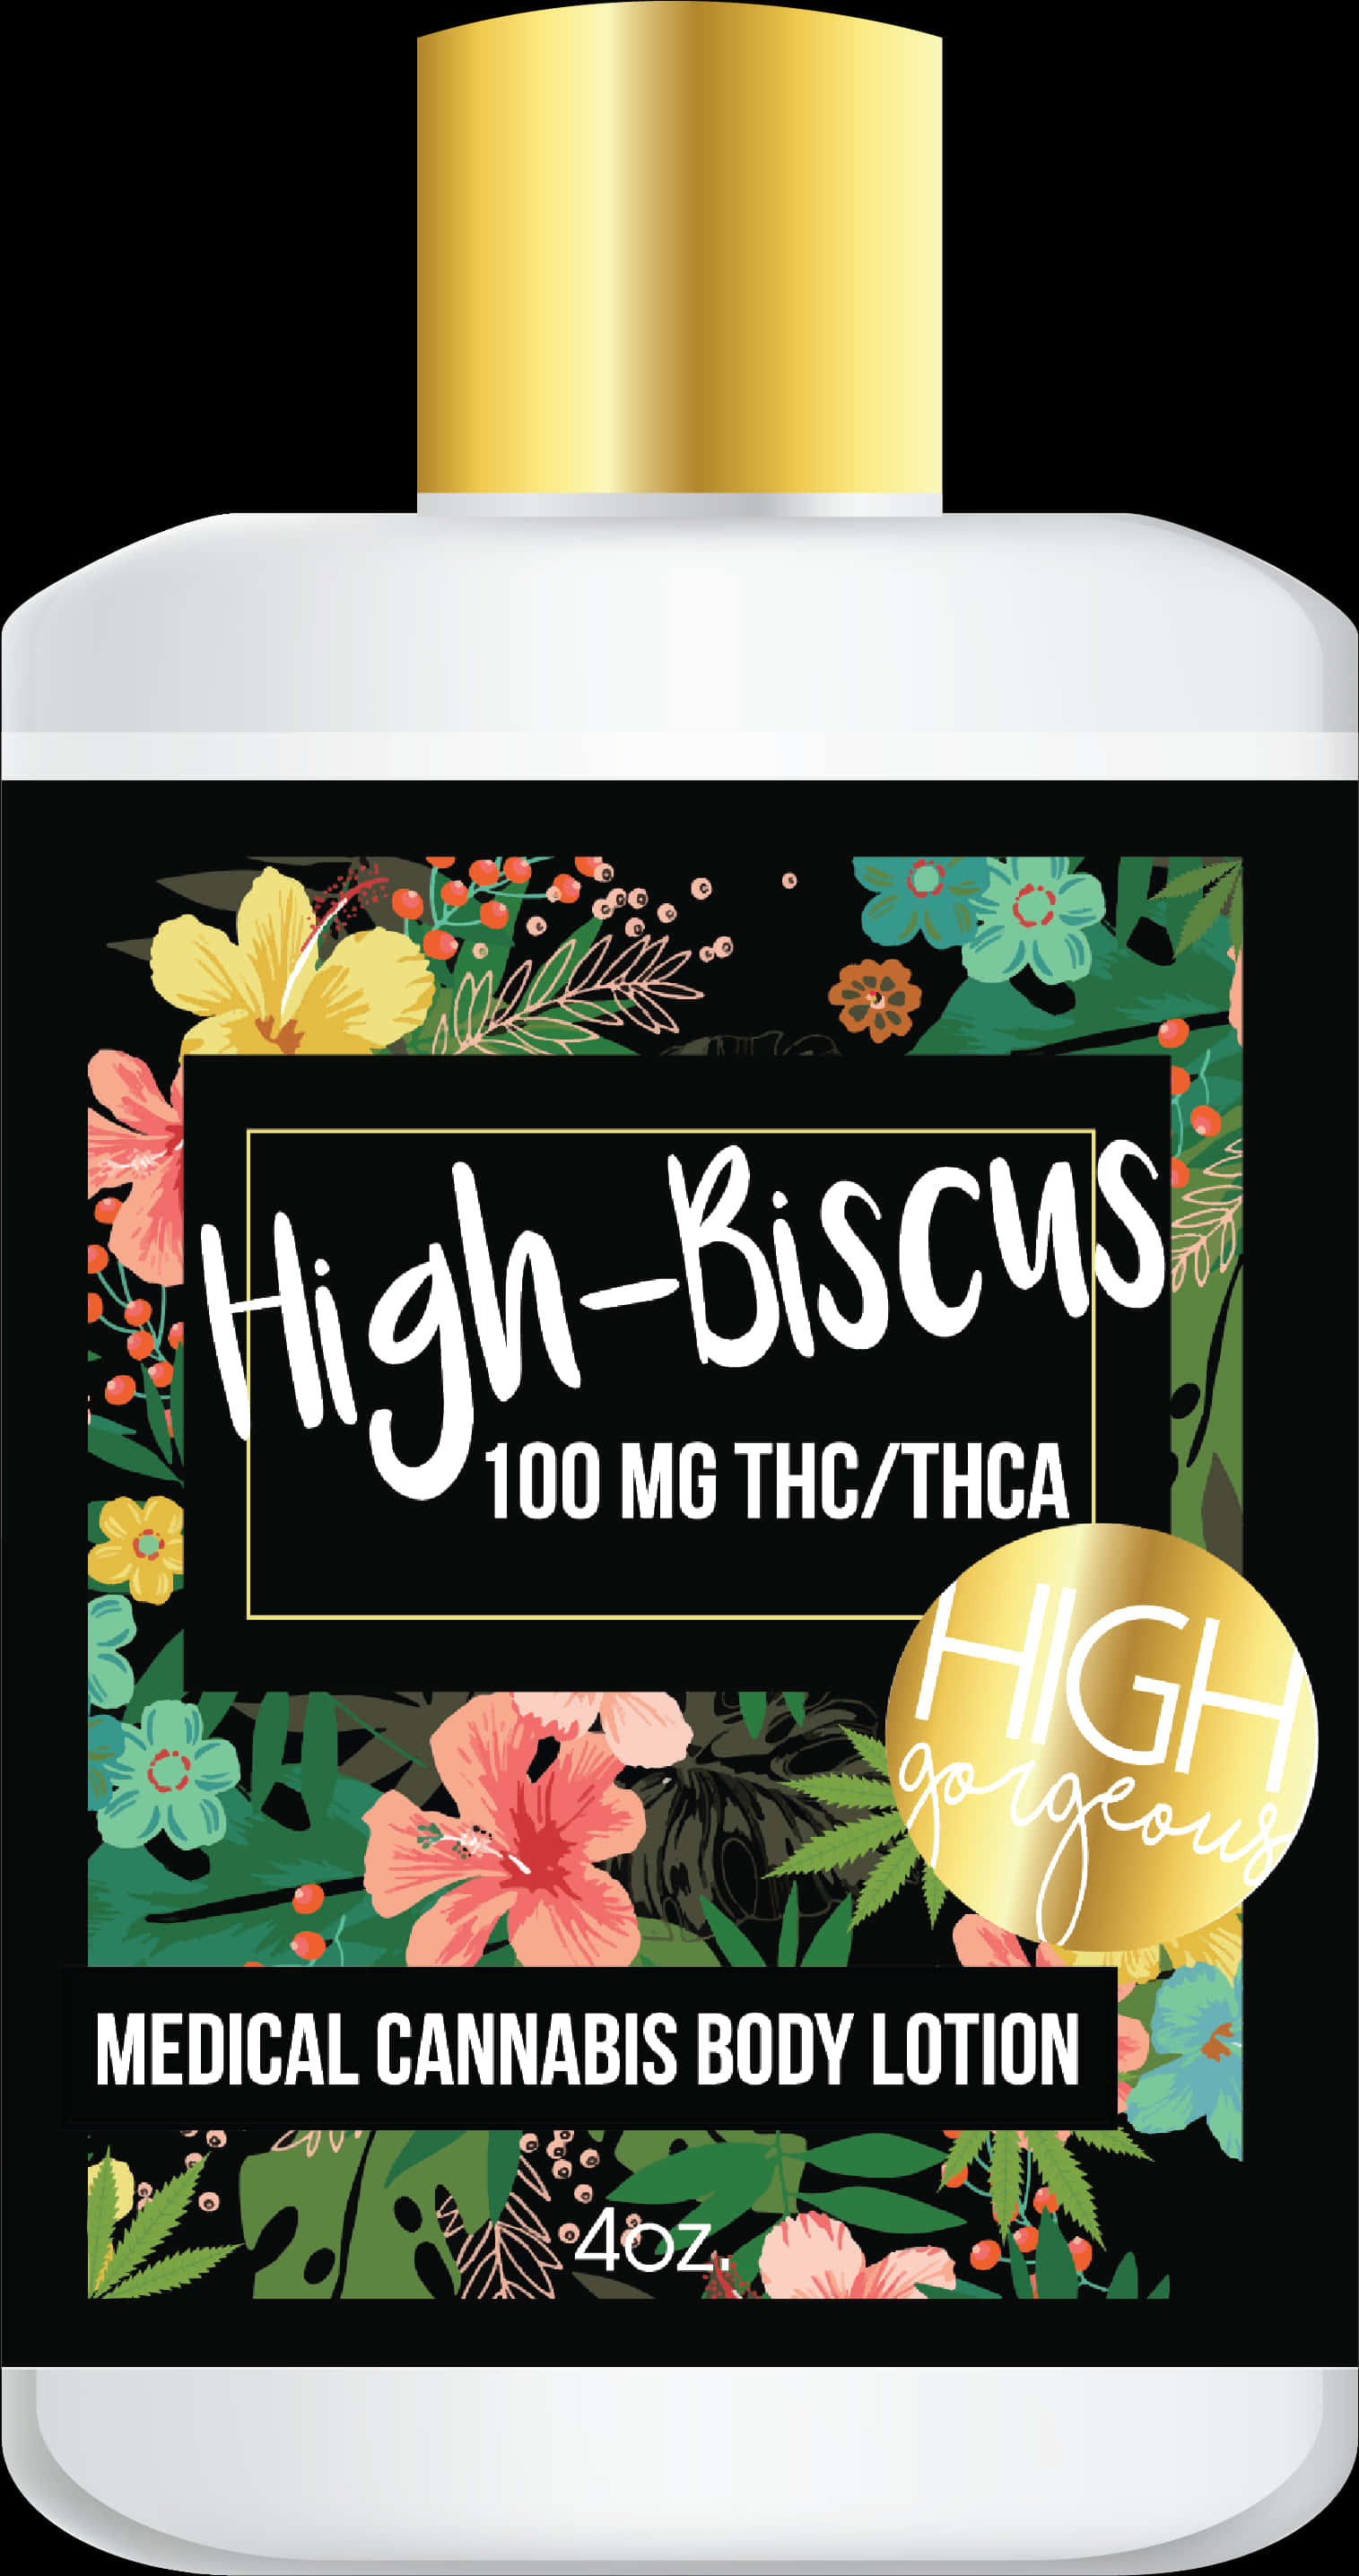 High Biscus Cannabis Body Lotion Product Wallpaper